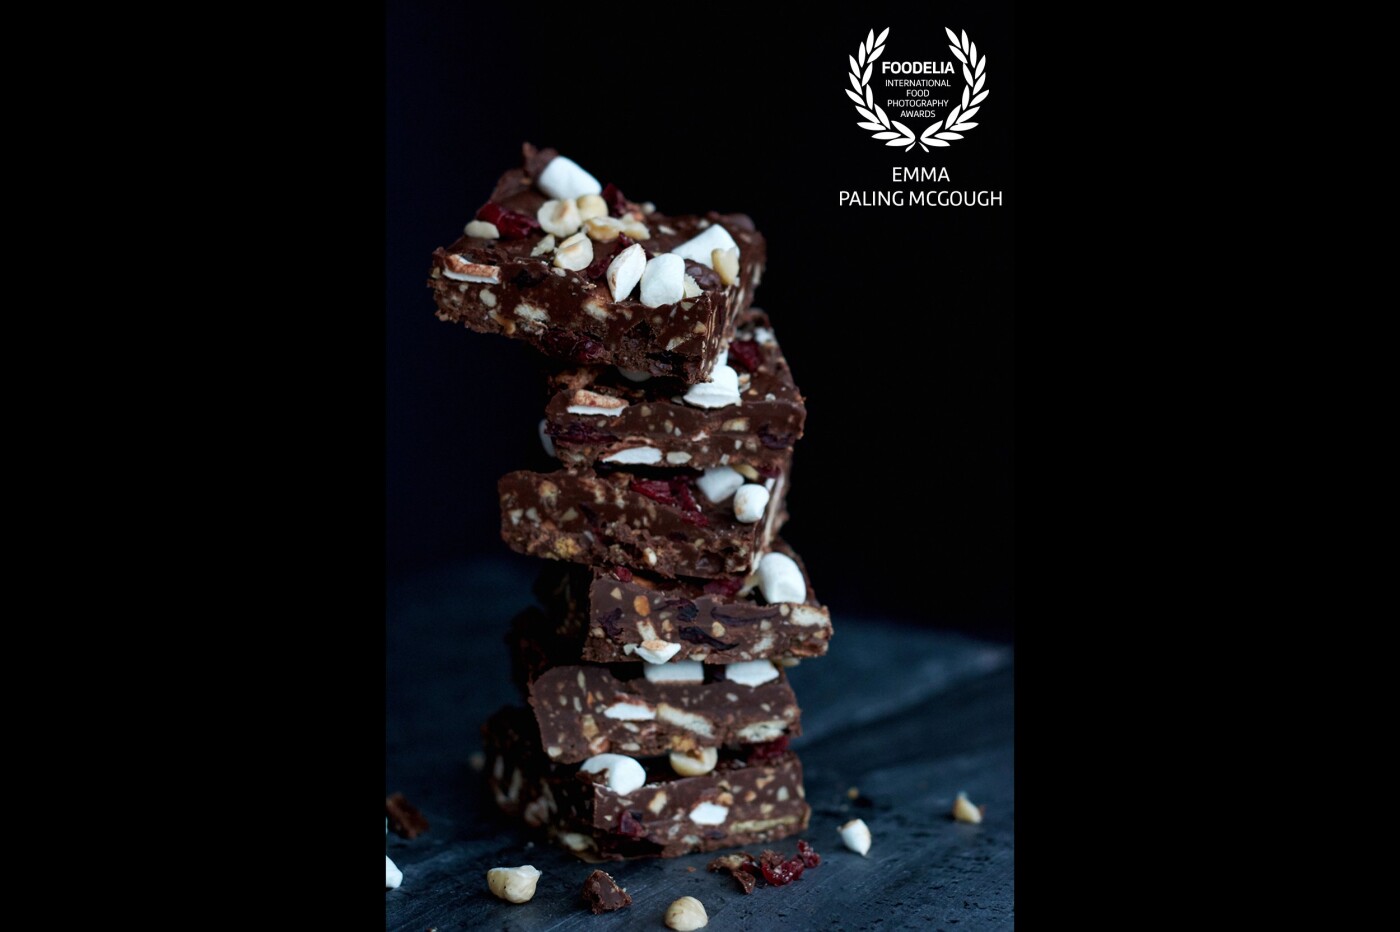 My daughter and I made some Rocky Road cake and, once it was made, it looked so photogenic I thought it would make a good picture for my stock library. Shot in my kitchen using only natural light and minimal styling, it proved popular both as a photograph and as a cake.